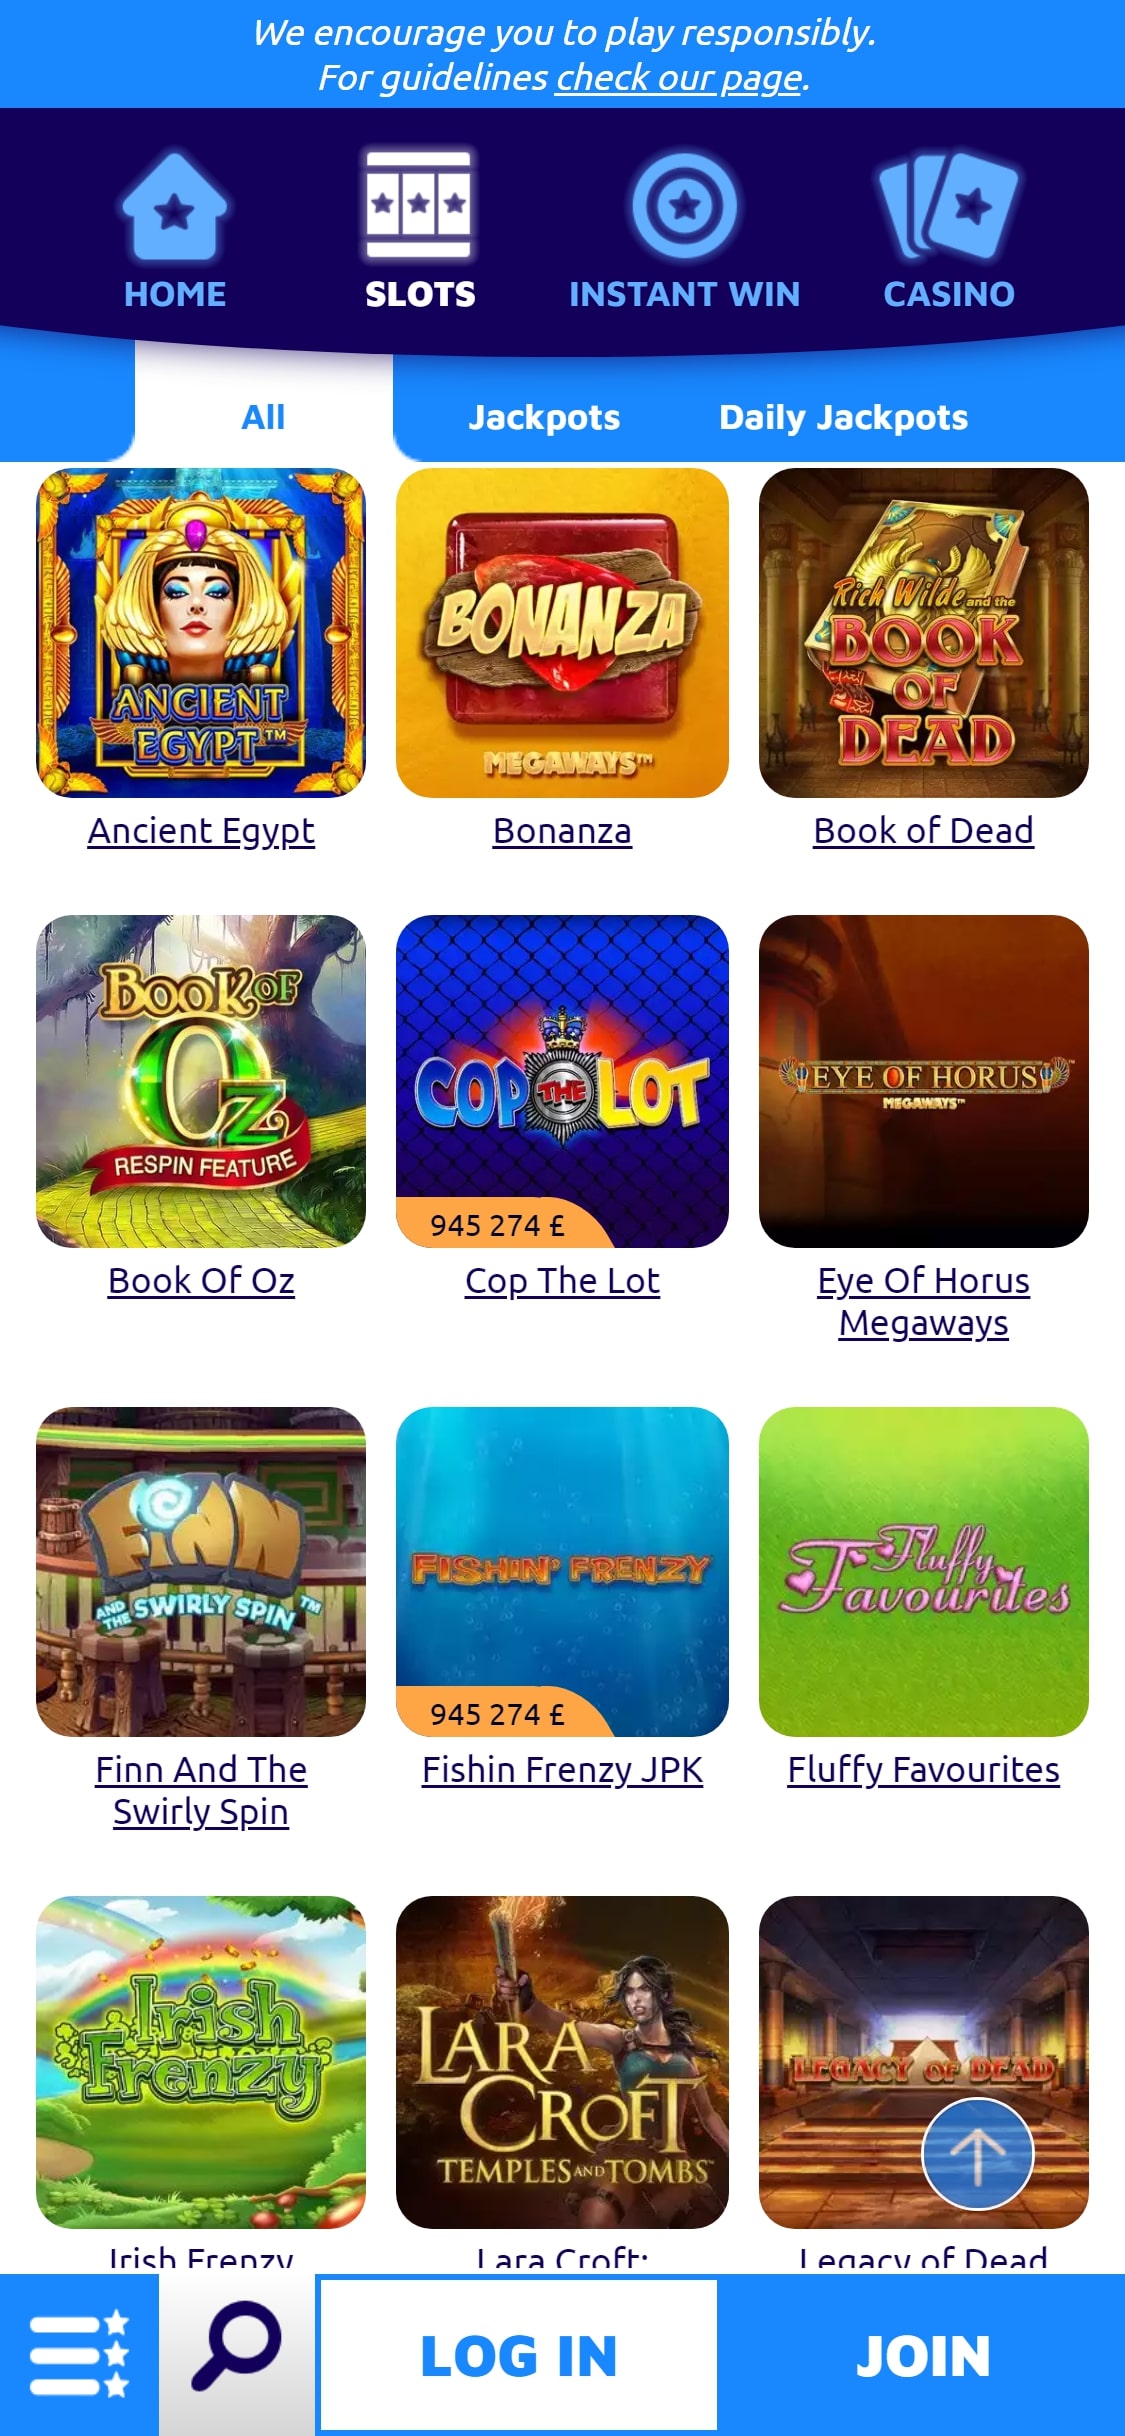 Spin Genie Casino Mobile Games Review